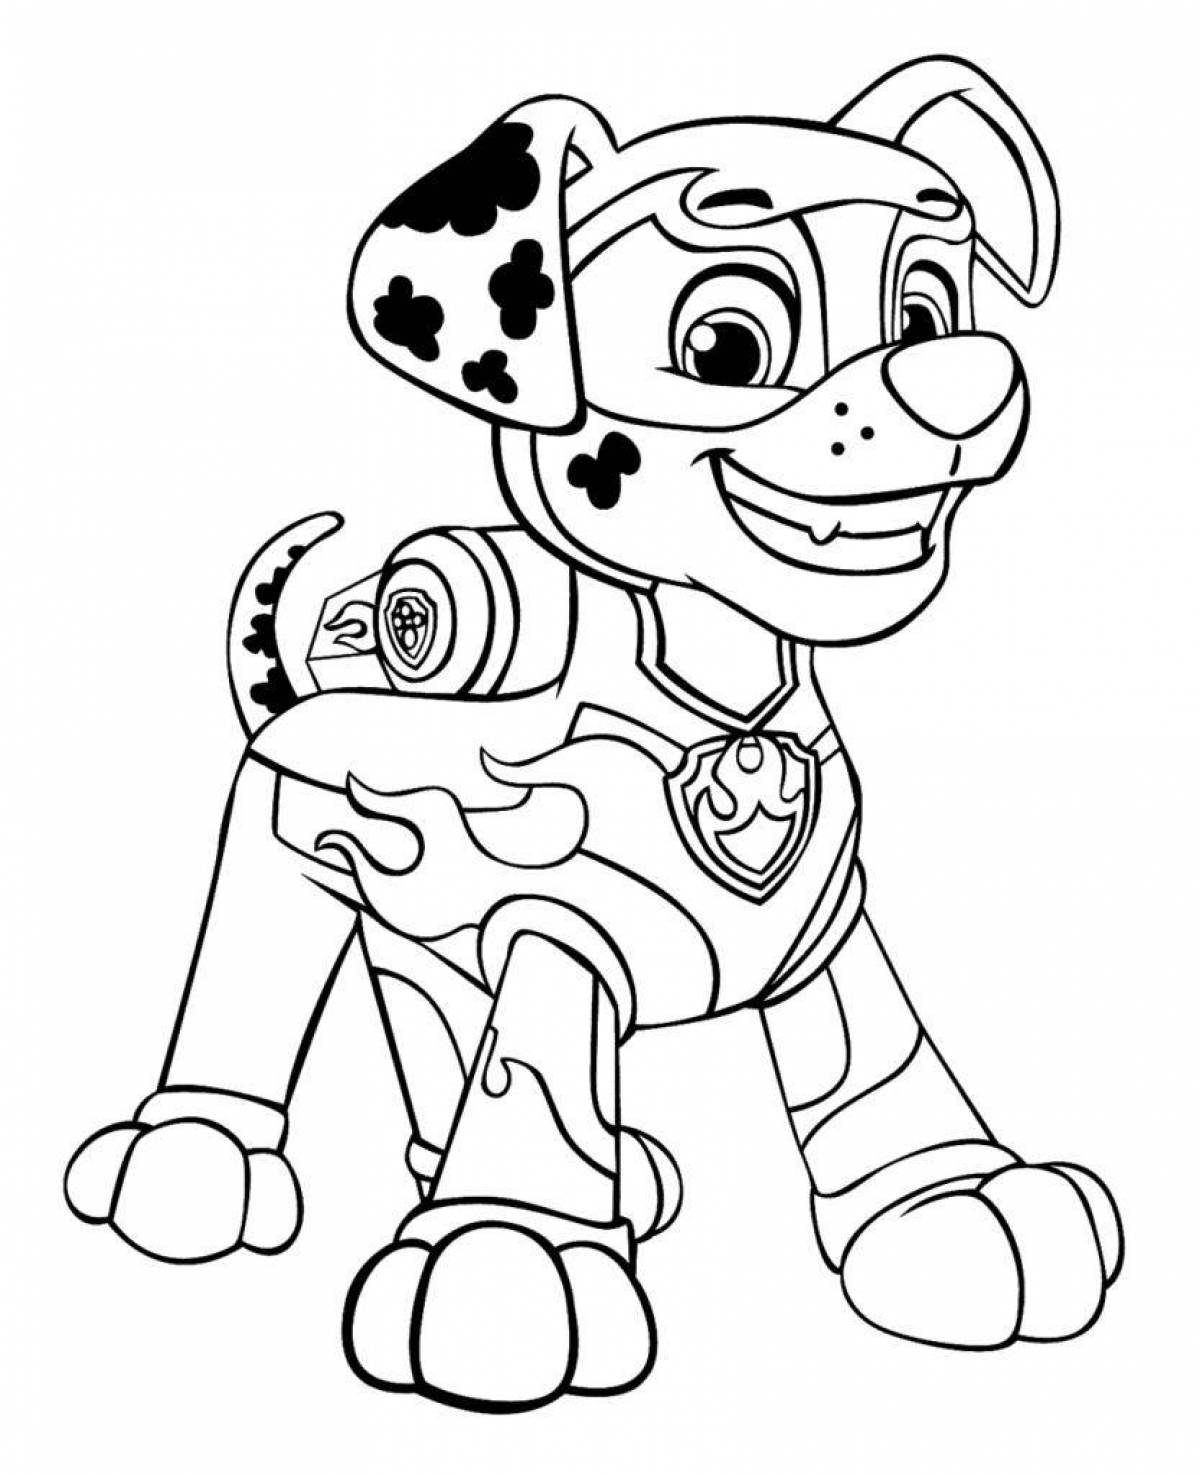 Colorful coloring page paw patrol mega puppies